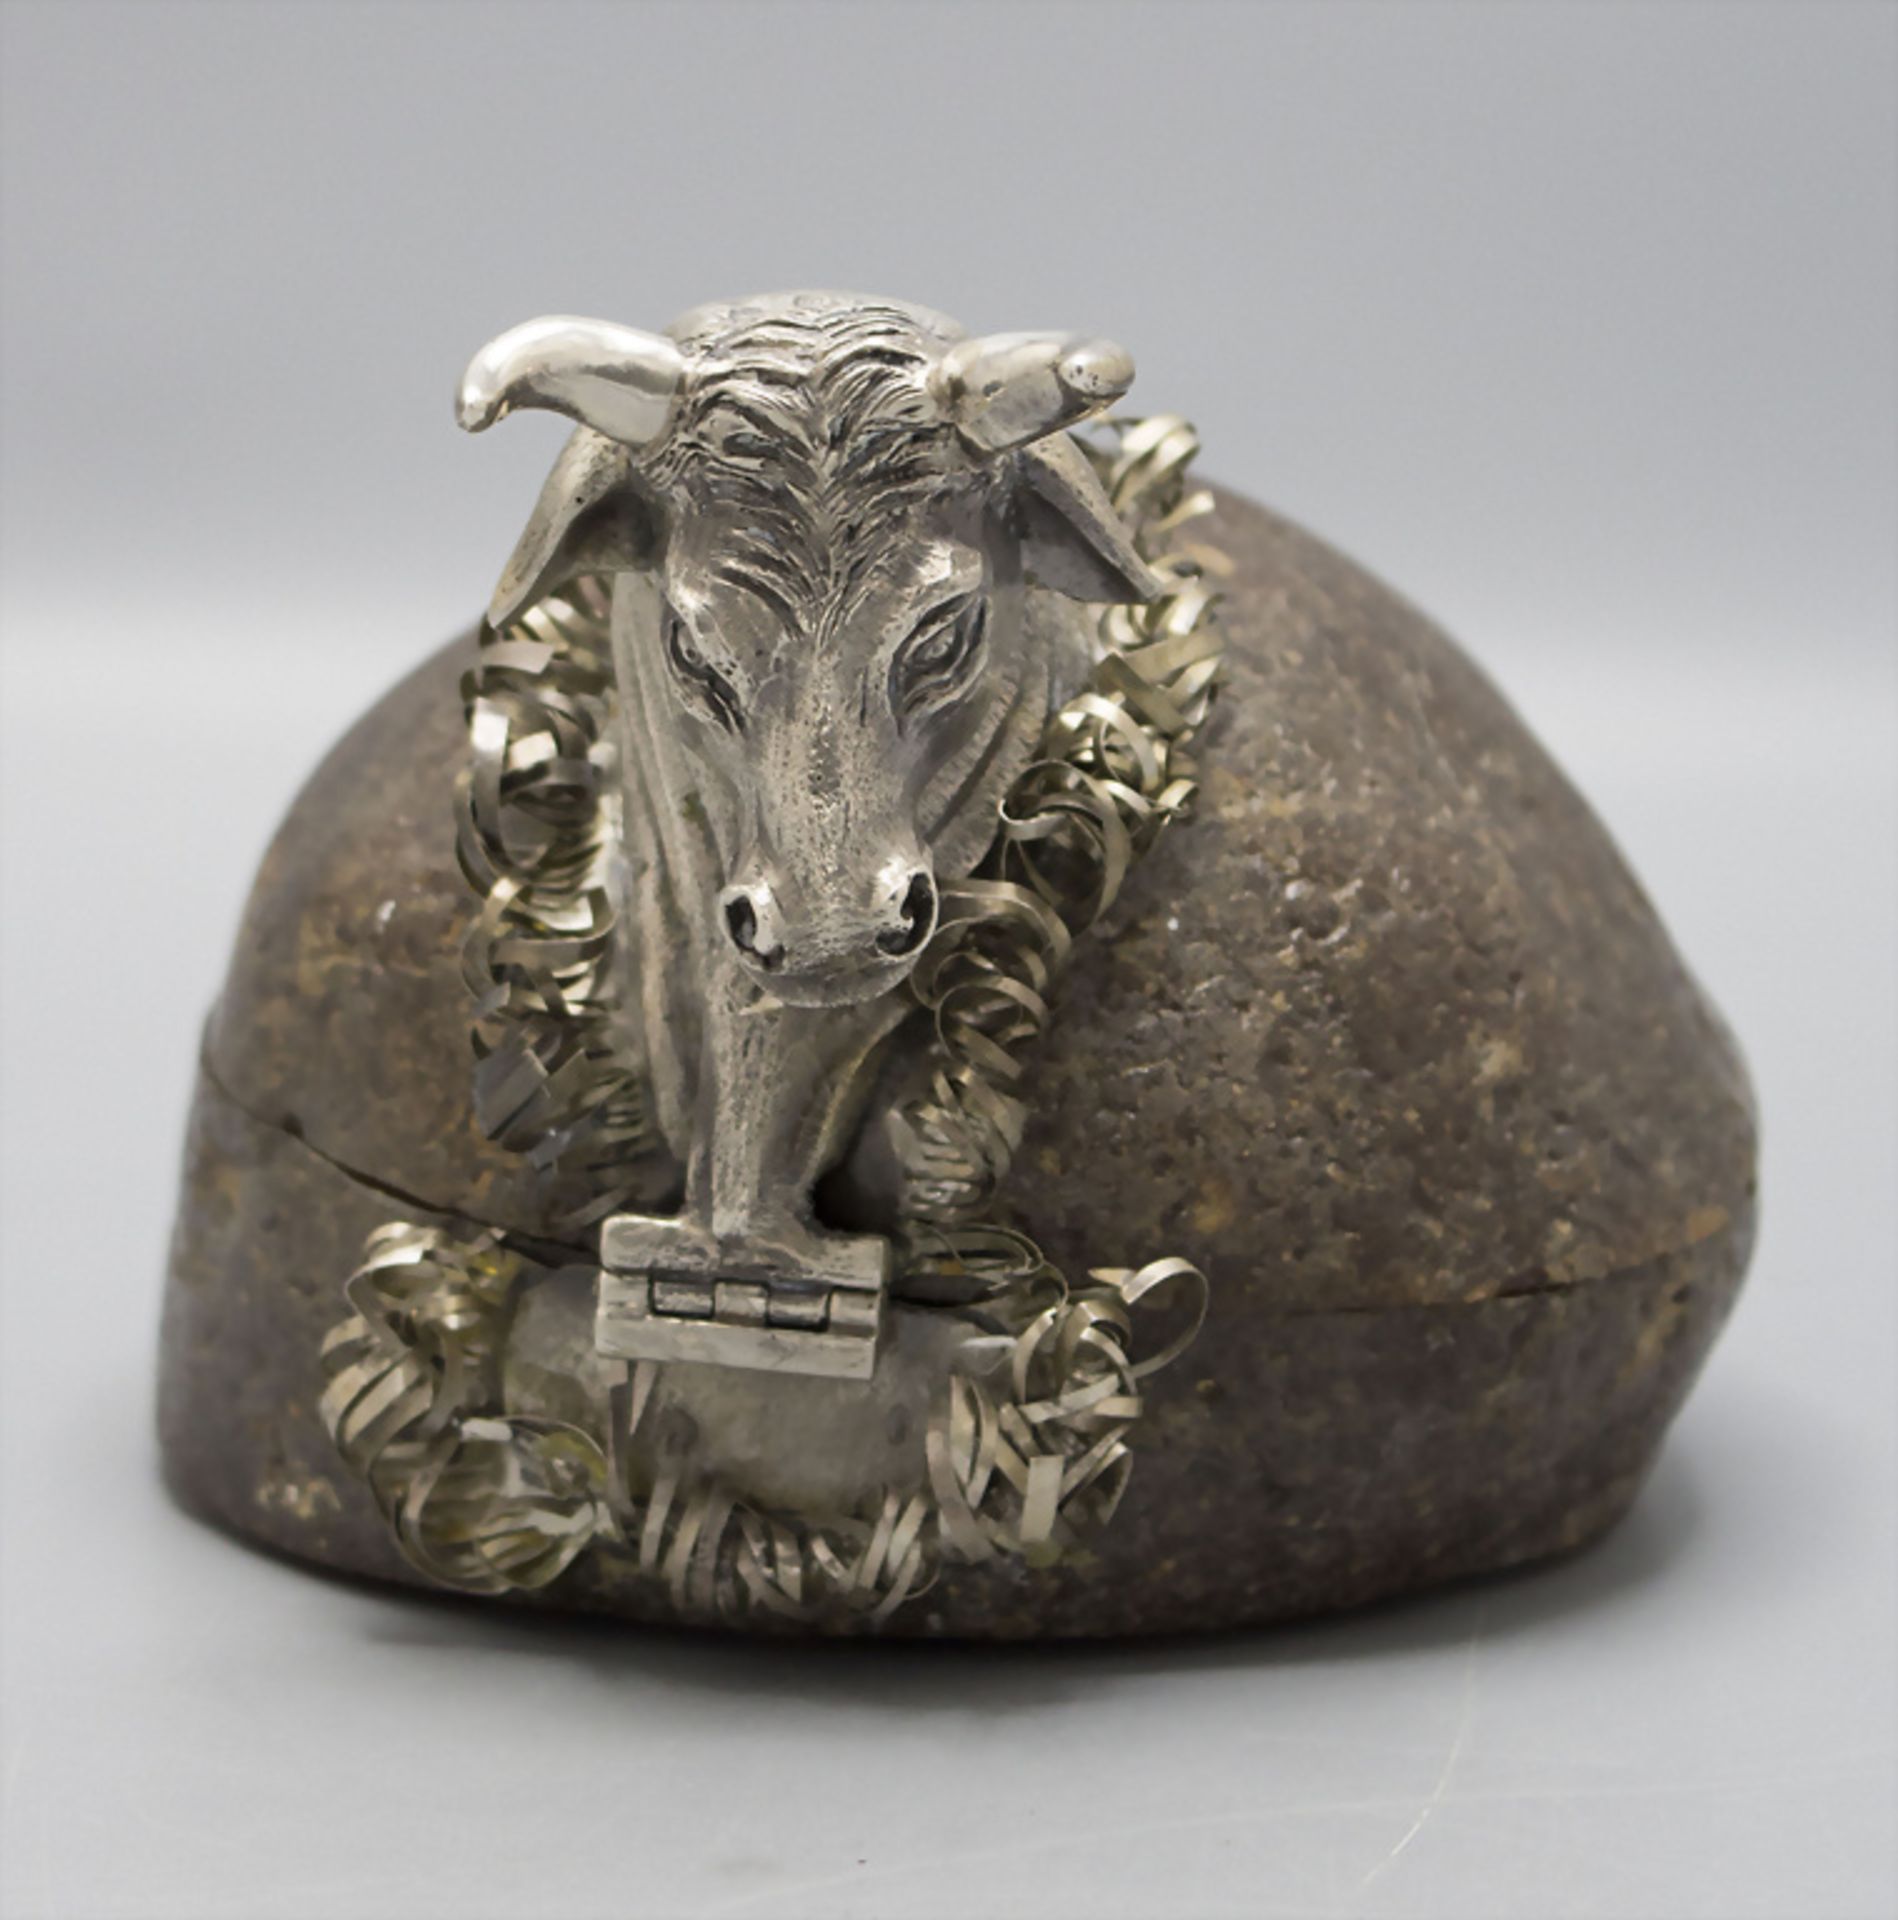 Achat- und Silberskluptur 'Stier' / An agate and silver sculpture of a bull, wohl Gabriele De ... - Image 2 of 6